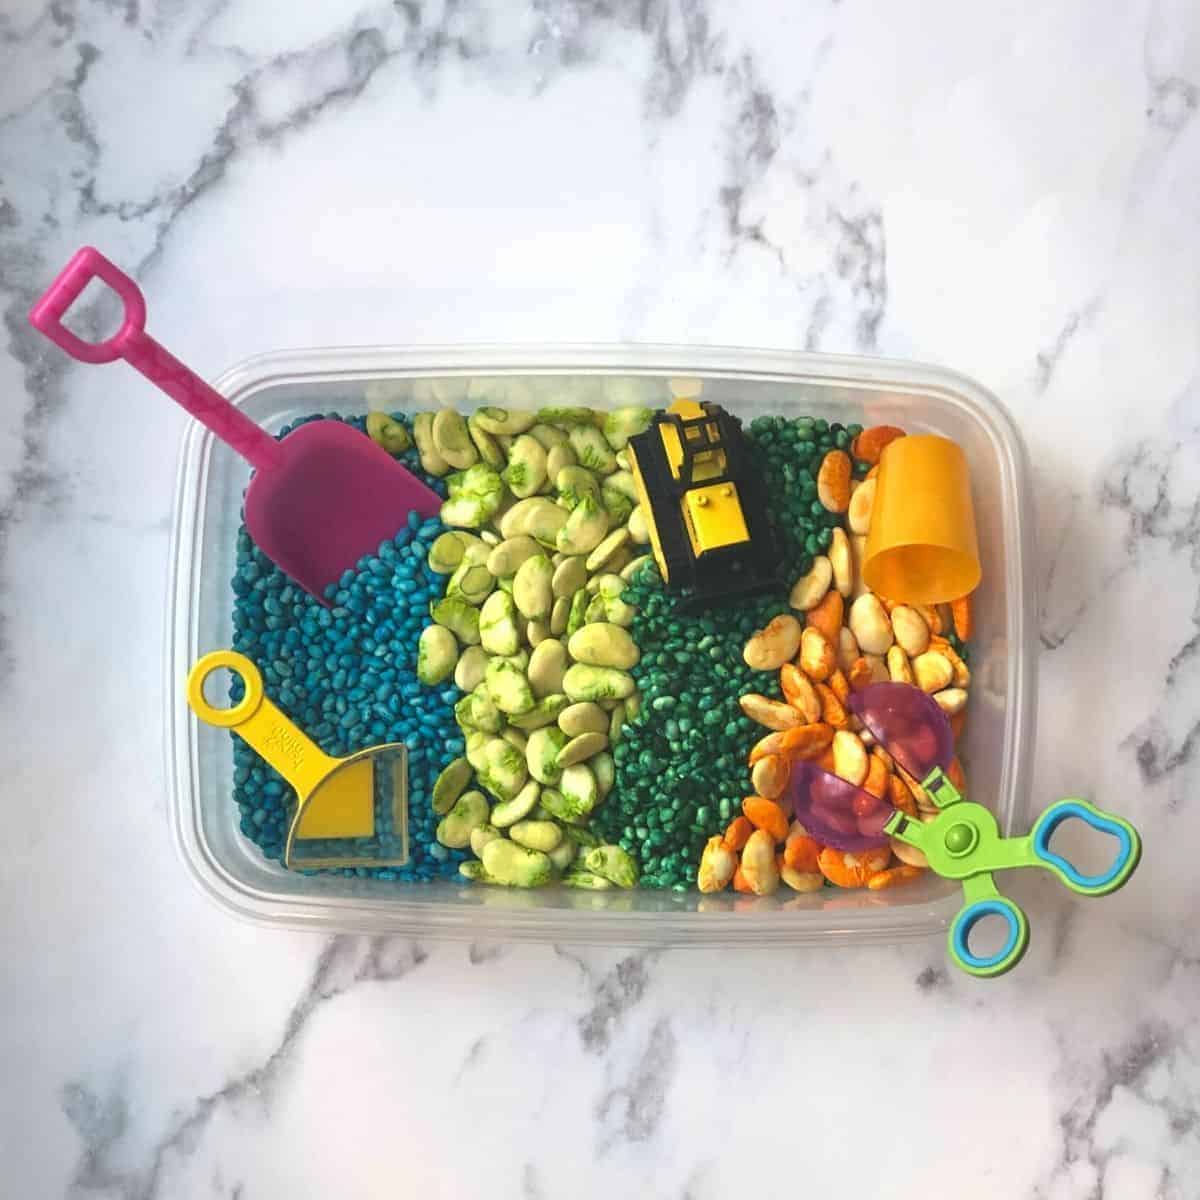 Bean Sensory Bin with scoops and toys